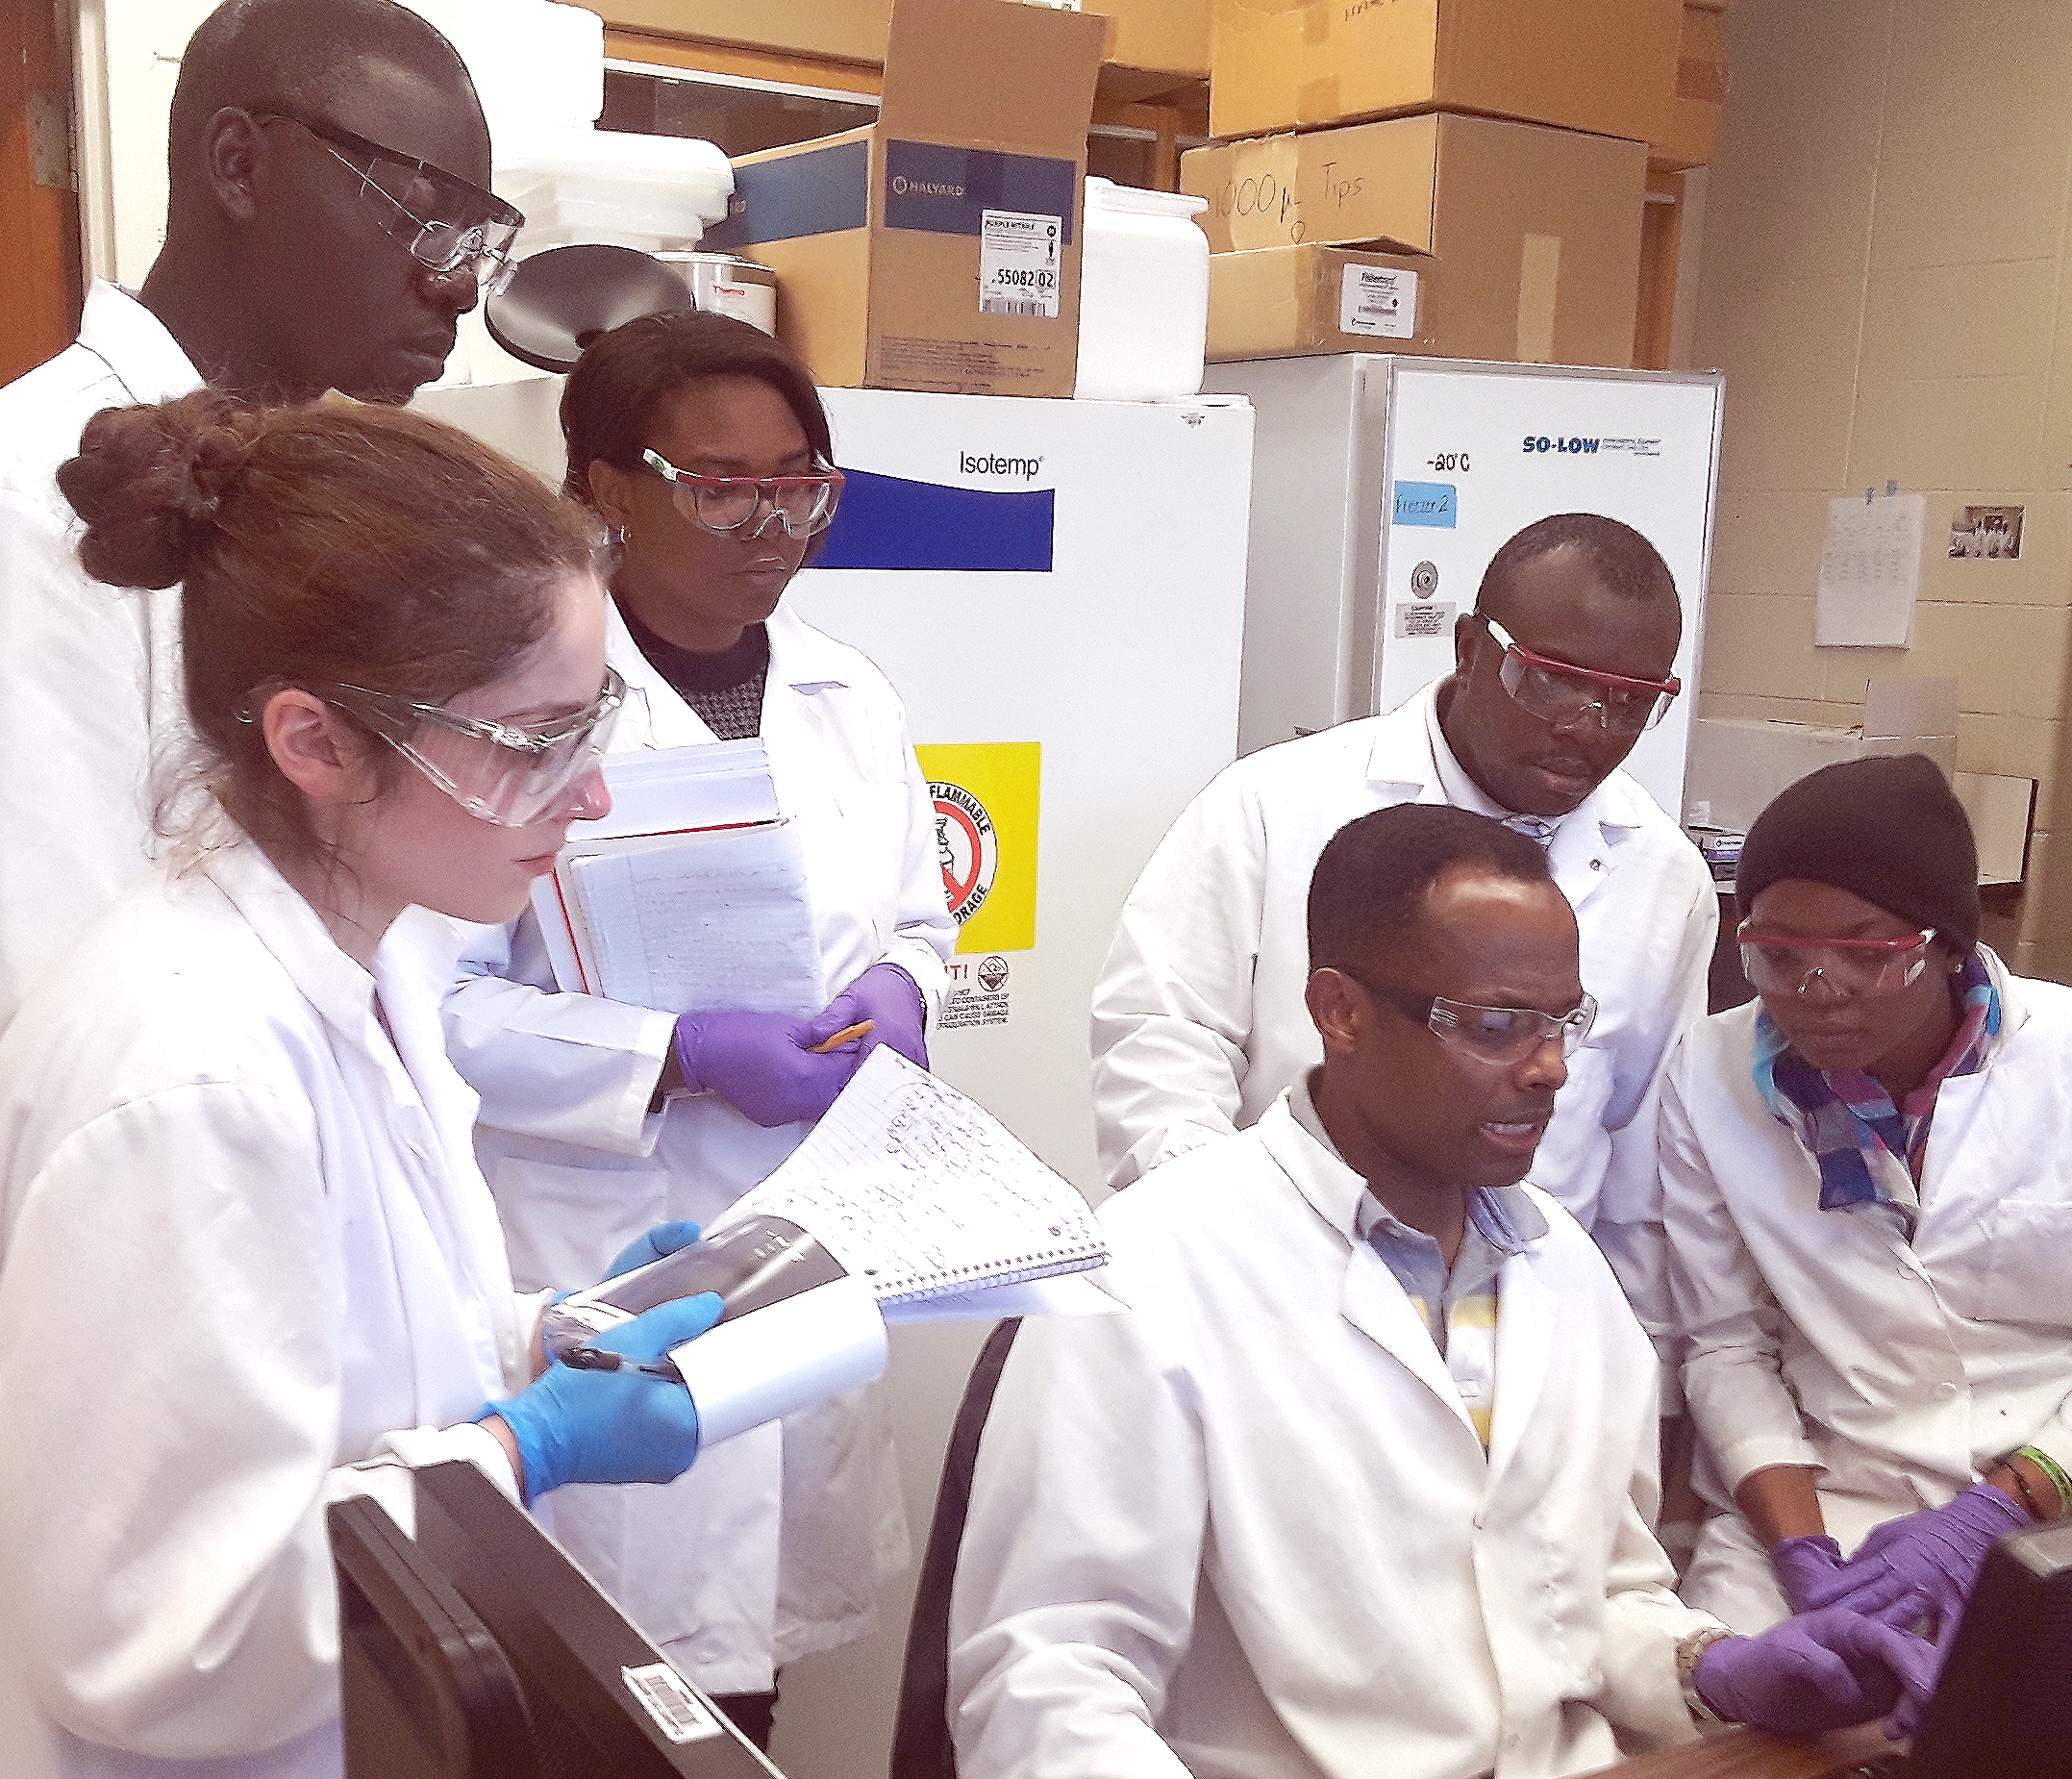 Students and post-doc review data in the Food Biotechnology Lab